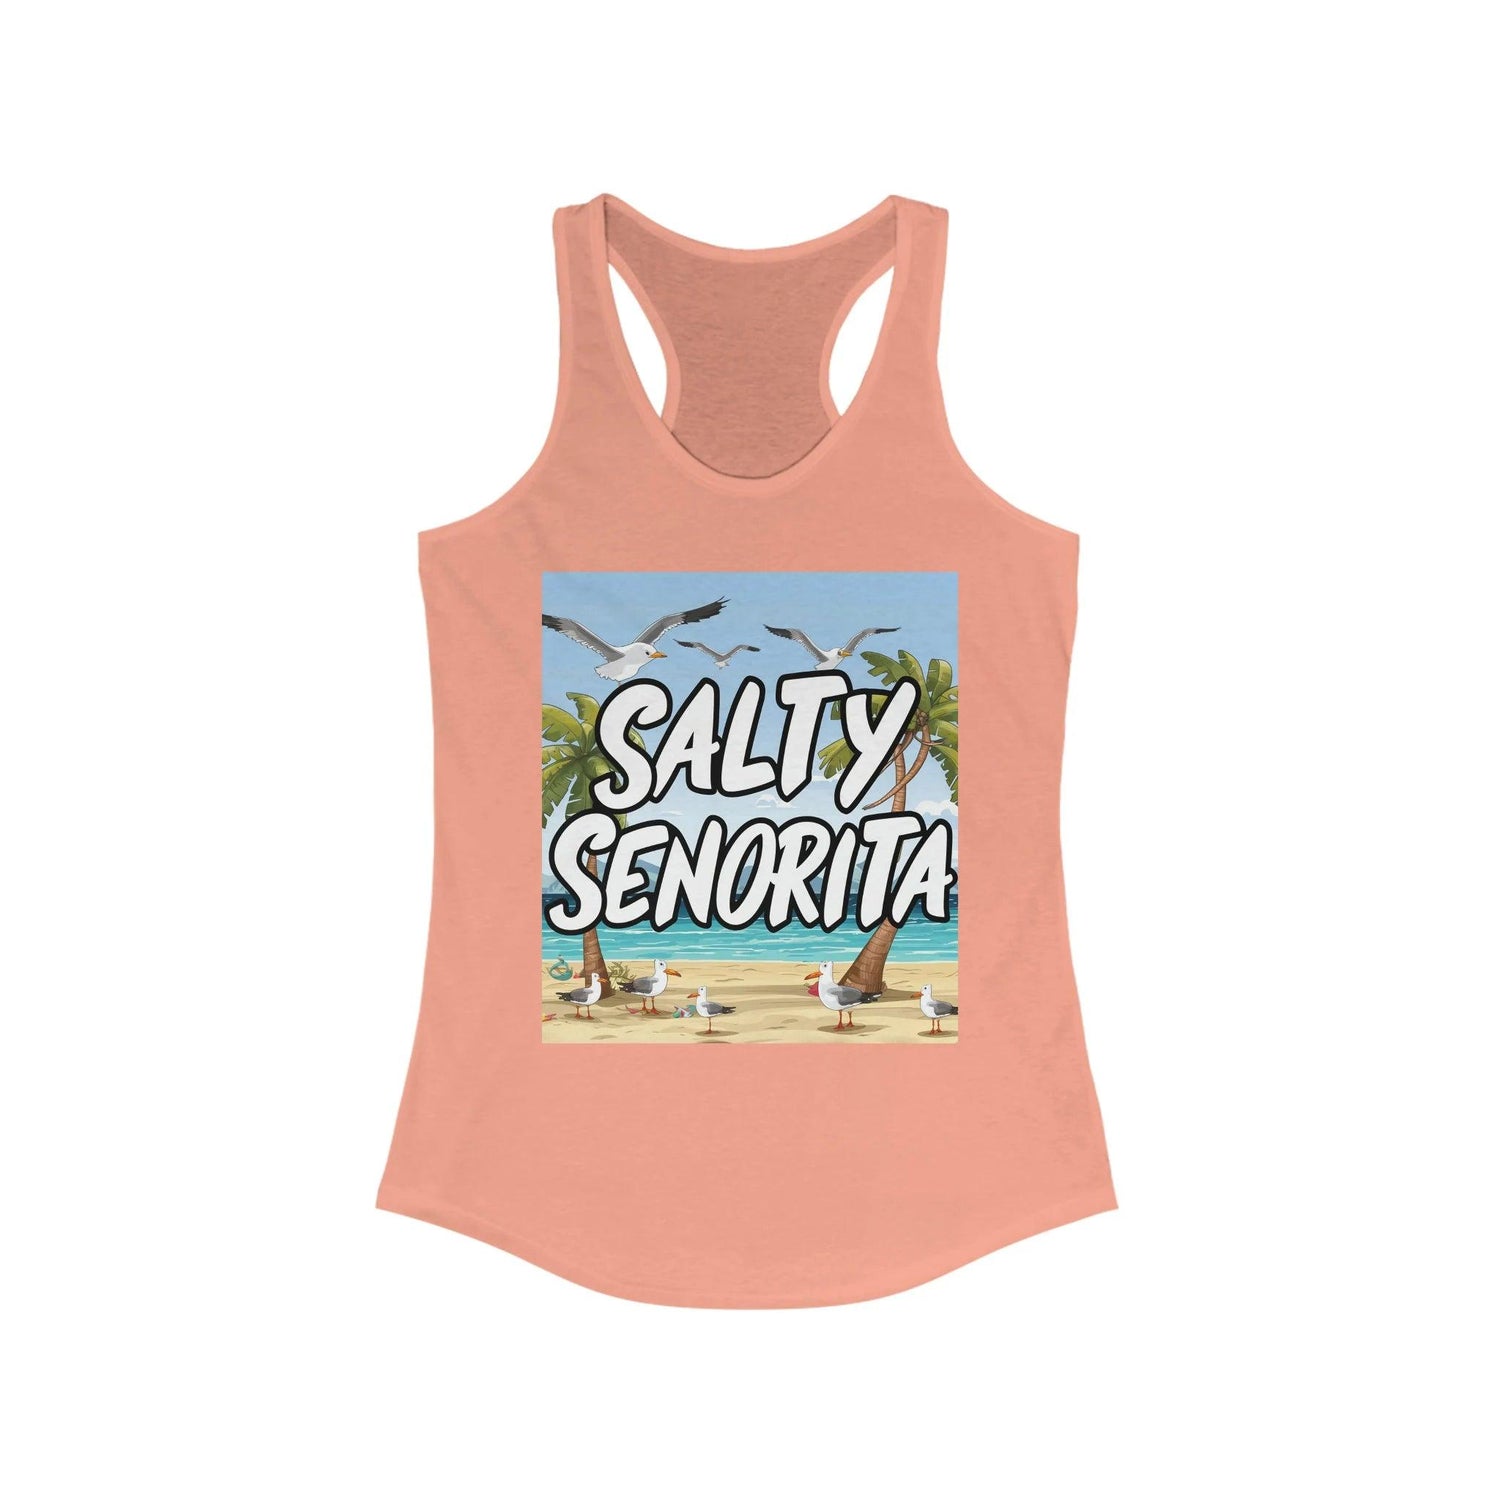 Tank Tops - Coastal Collections